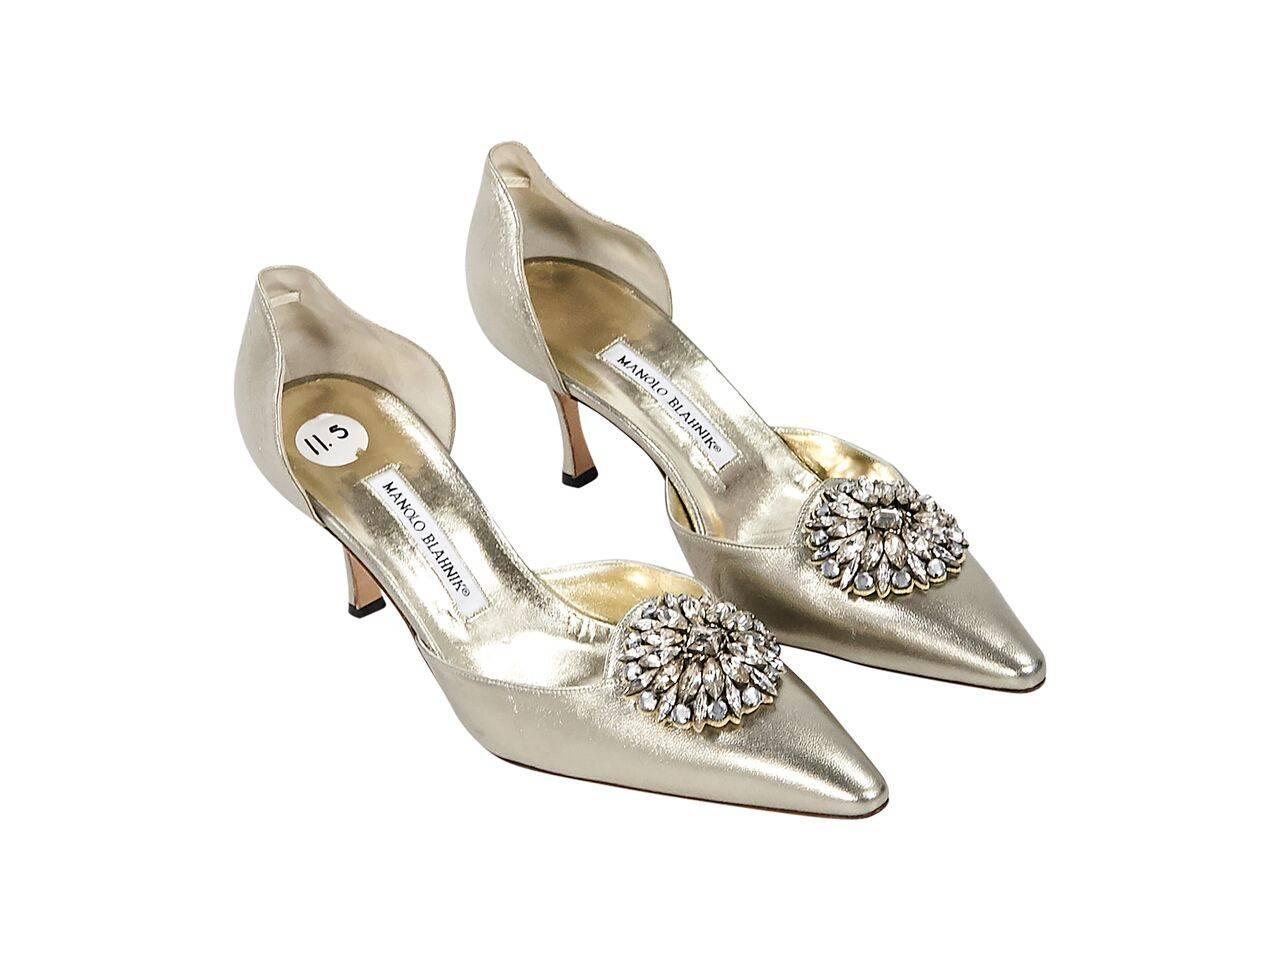 Product details:  Metallic gold leather d'Orsay pumps by Manolo Blahnik.  Crystal embellishment at vamp.  Point toe.  Slip-on style. 
Condition: Pre-owned. Very good.
Est. Retail $ 945.00